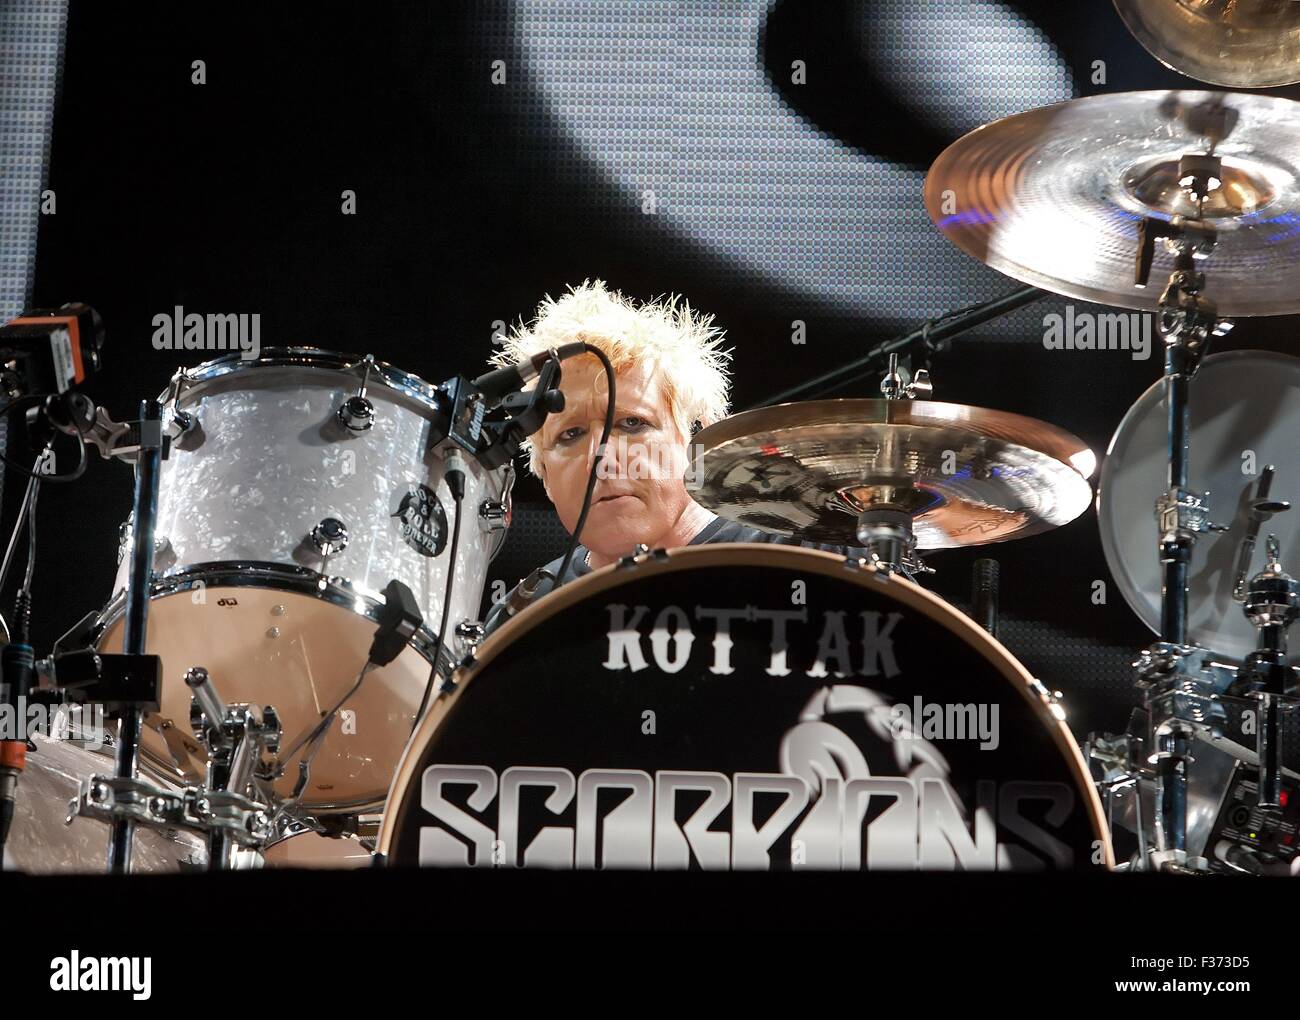 Englewood, Colorado, USA. 29th Sep, 2015. Scorpions Drummer JAMES KOTTAK entertains a packed house at Fiddler's Green Amphitheatre Tuesday evening. Credit:  Hector Acevedo/ZUMA Wire/Alamy Live News Stock Photo